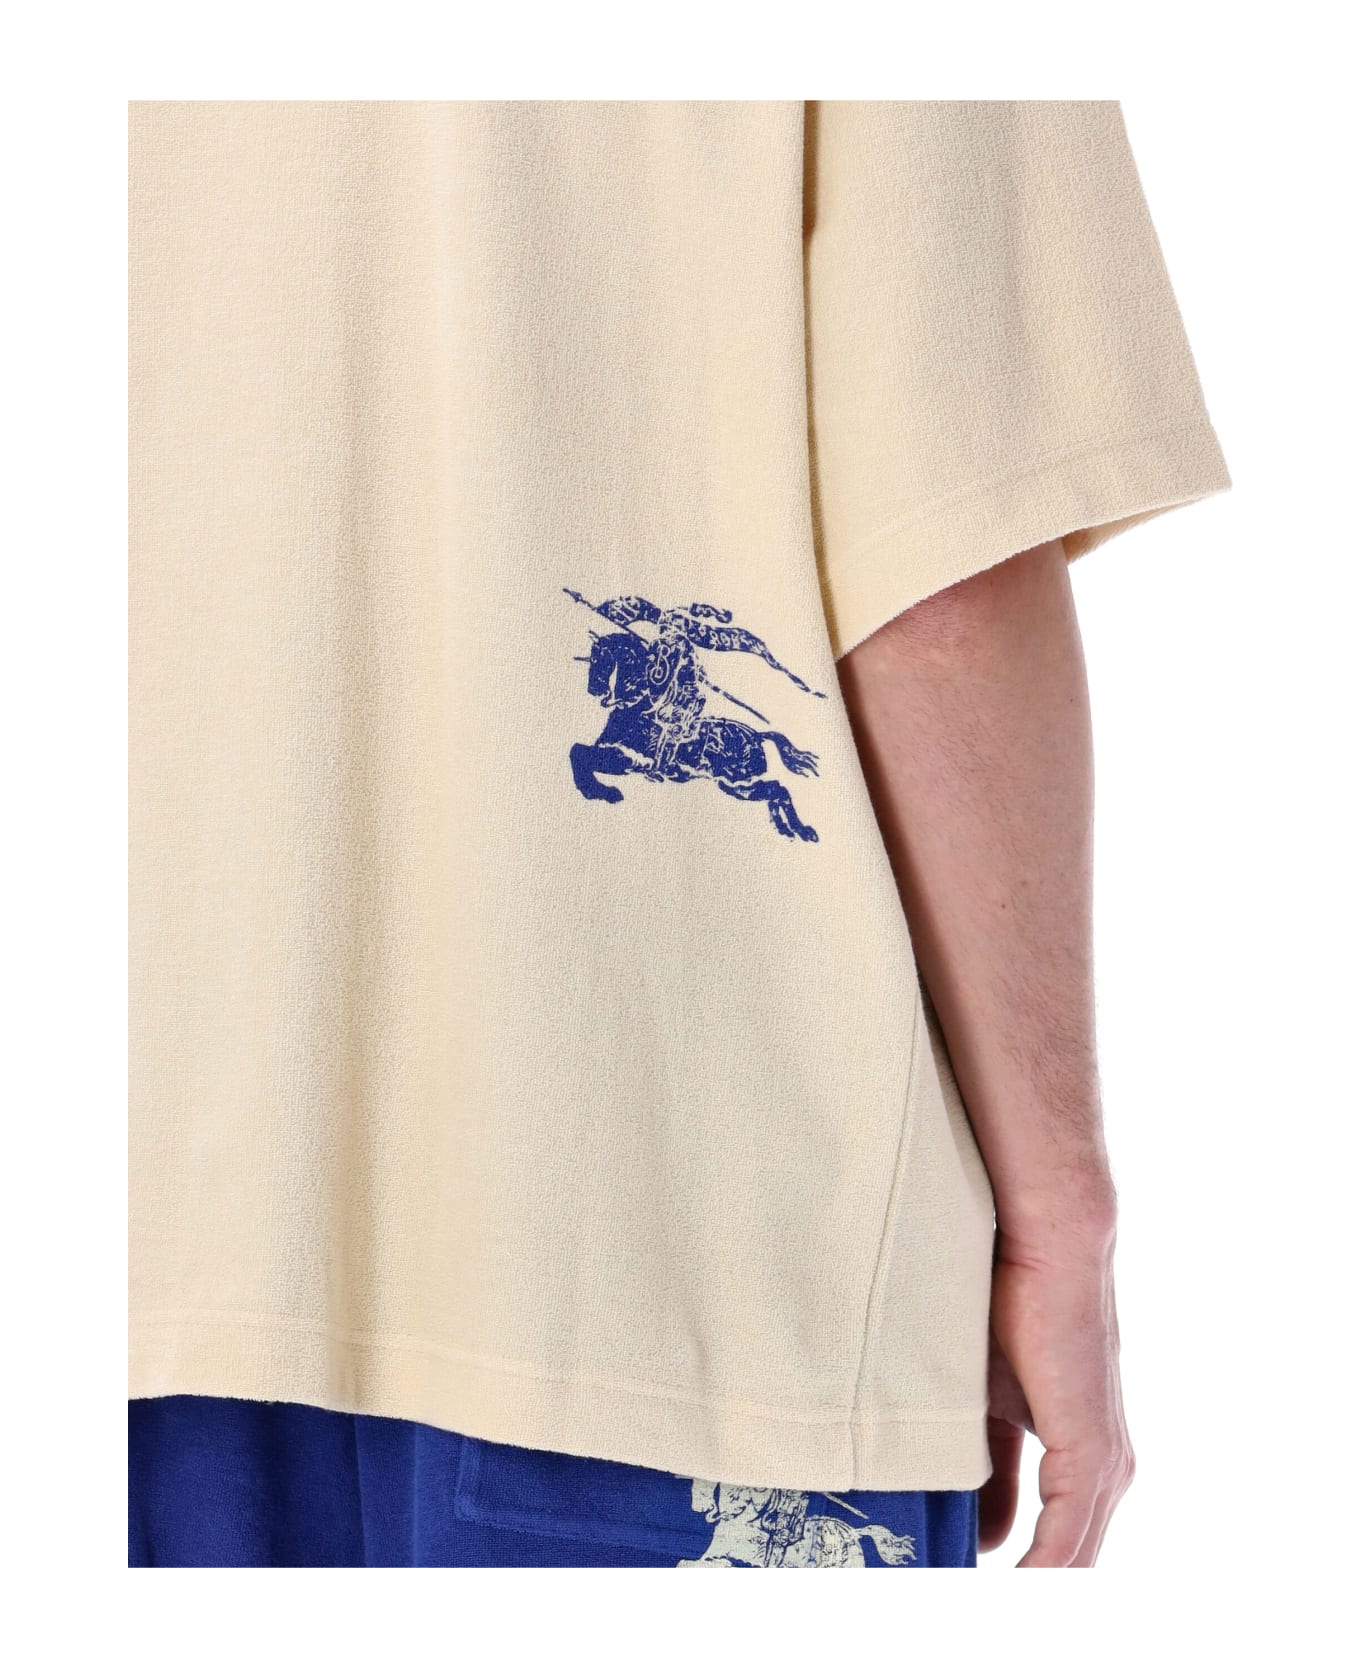 Burberry London Towelling T-shirt - CALICO シャツ